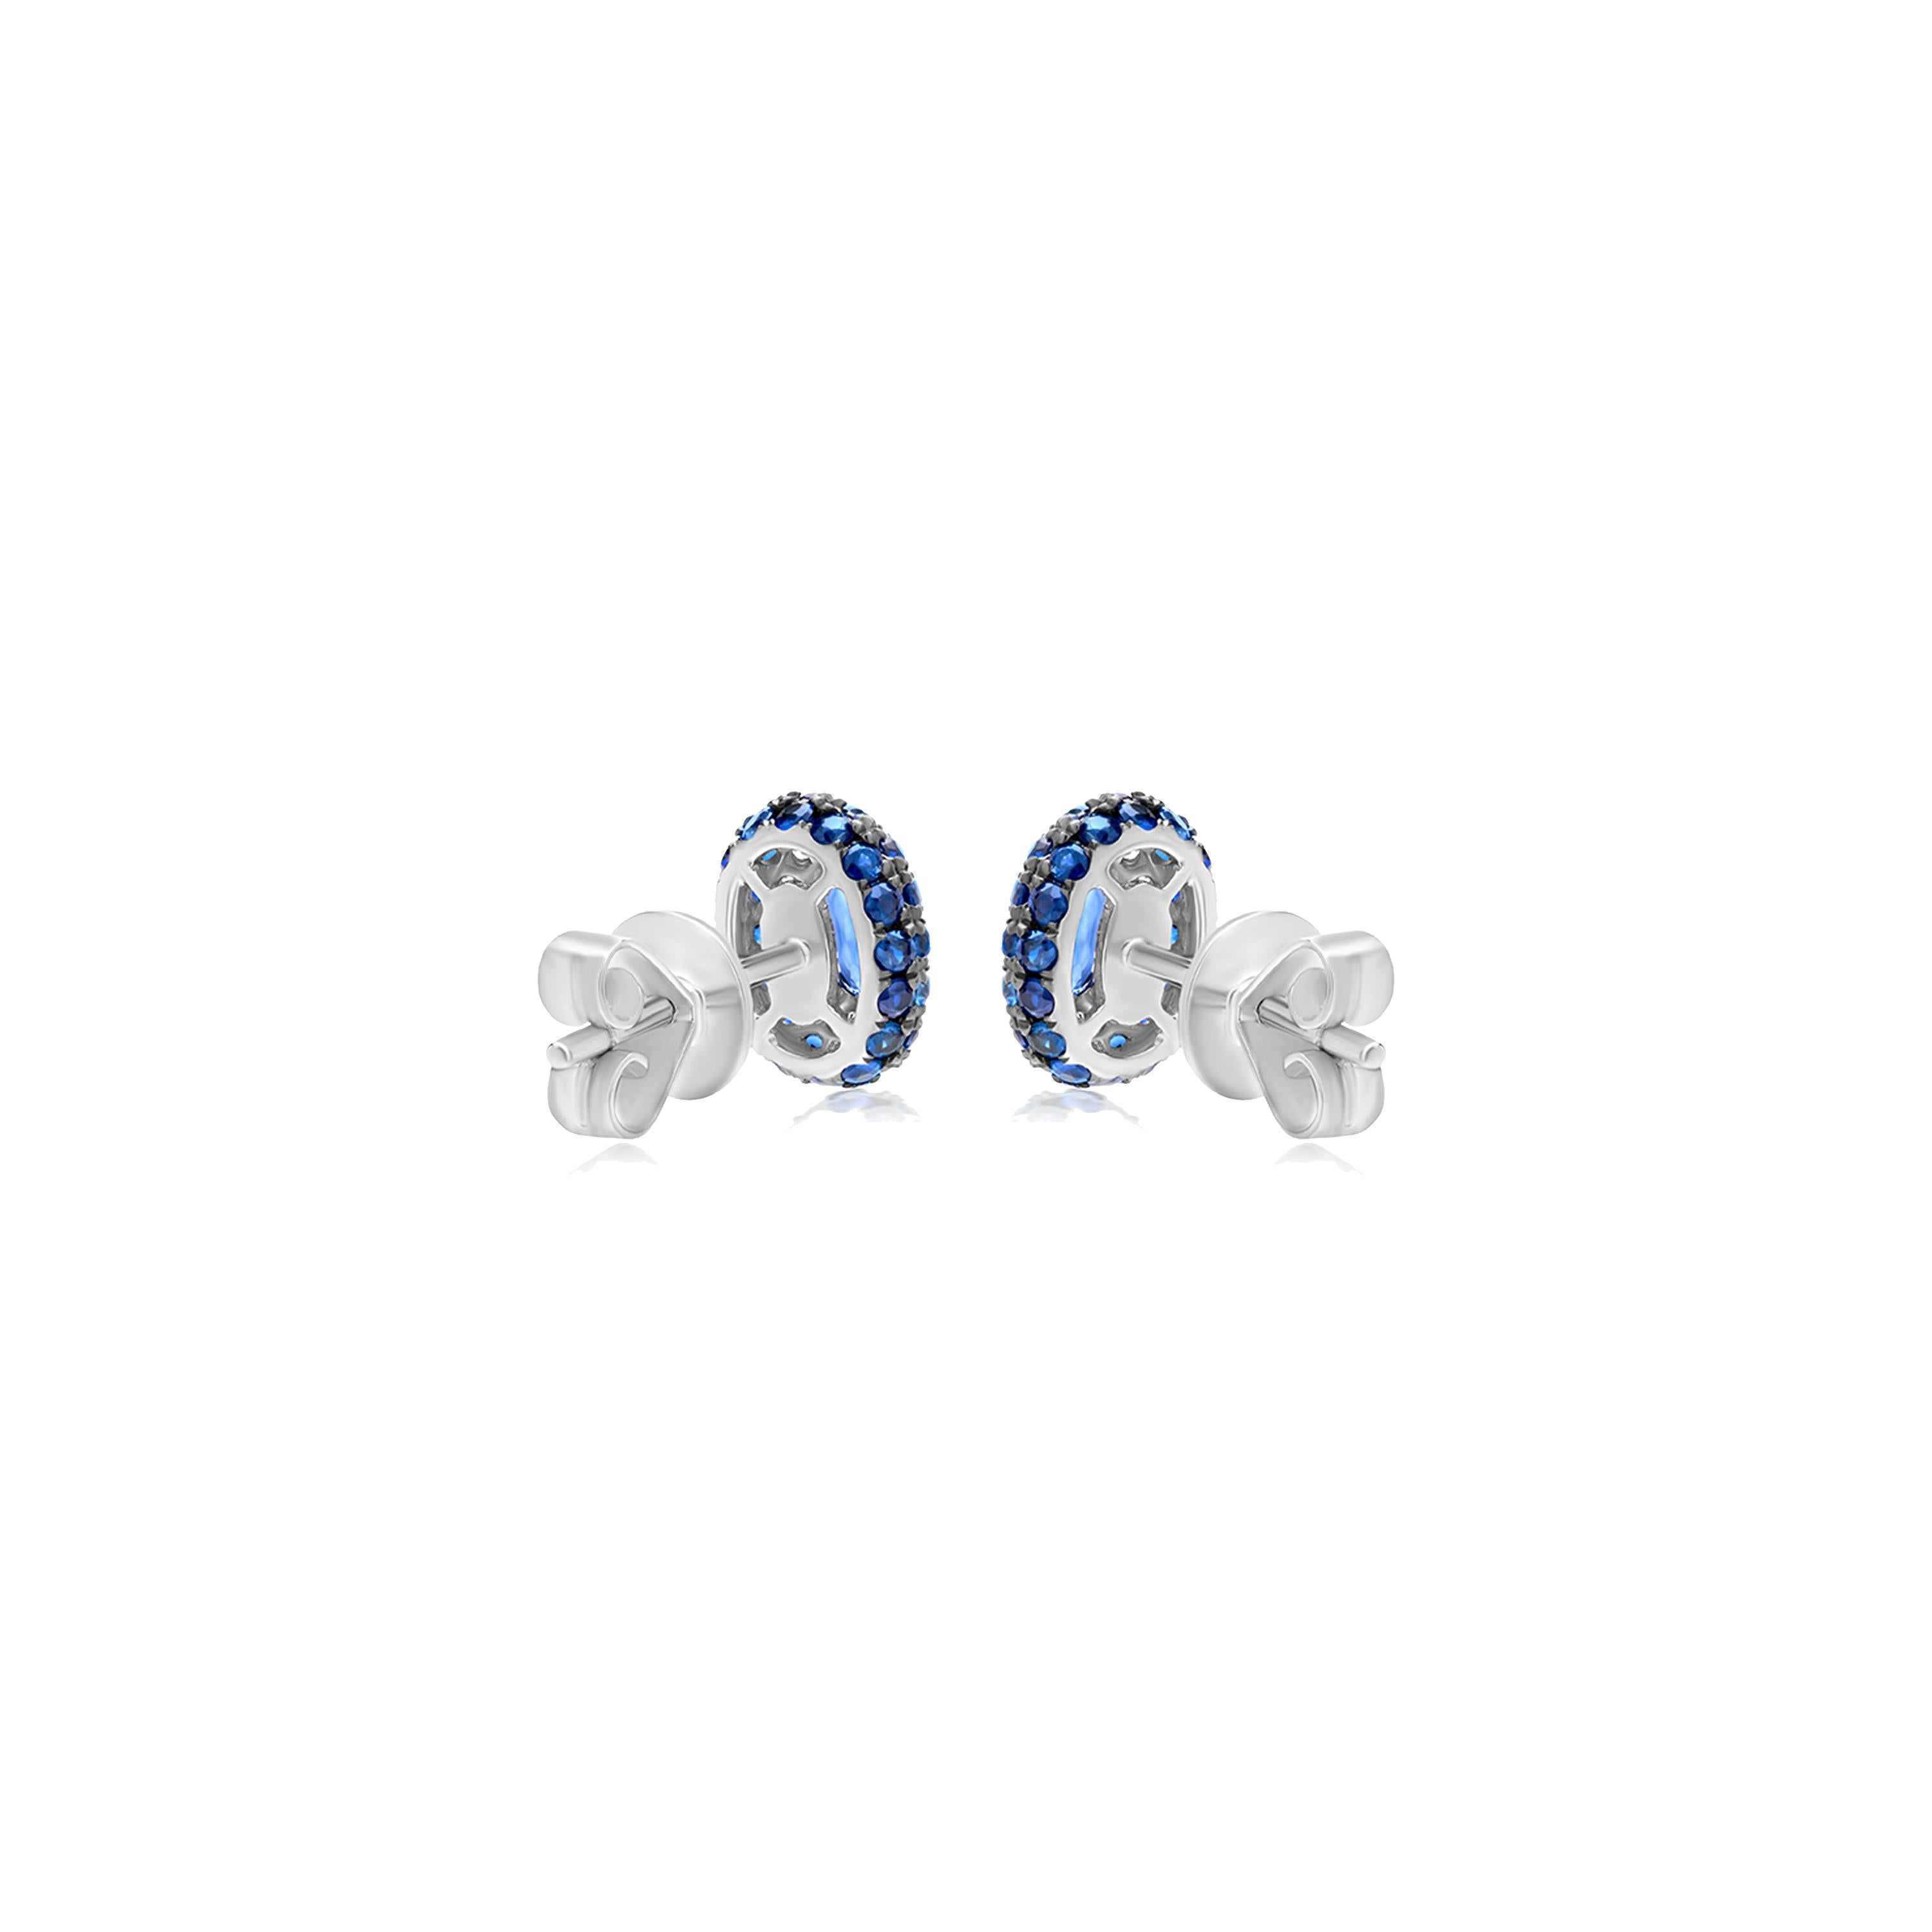 Contemporary Gemistry 1.33cttw. Blue Sapphire and Diamond Stud Earrings in 18k White Gold